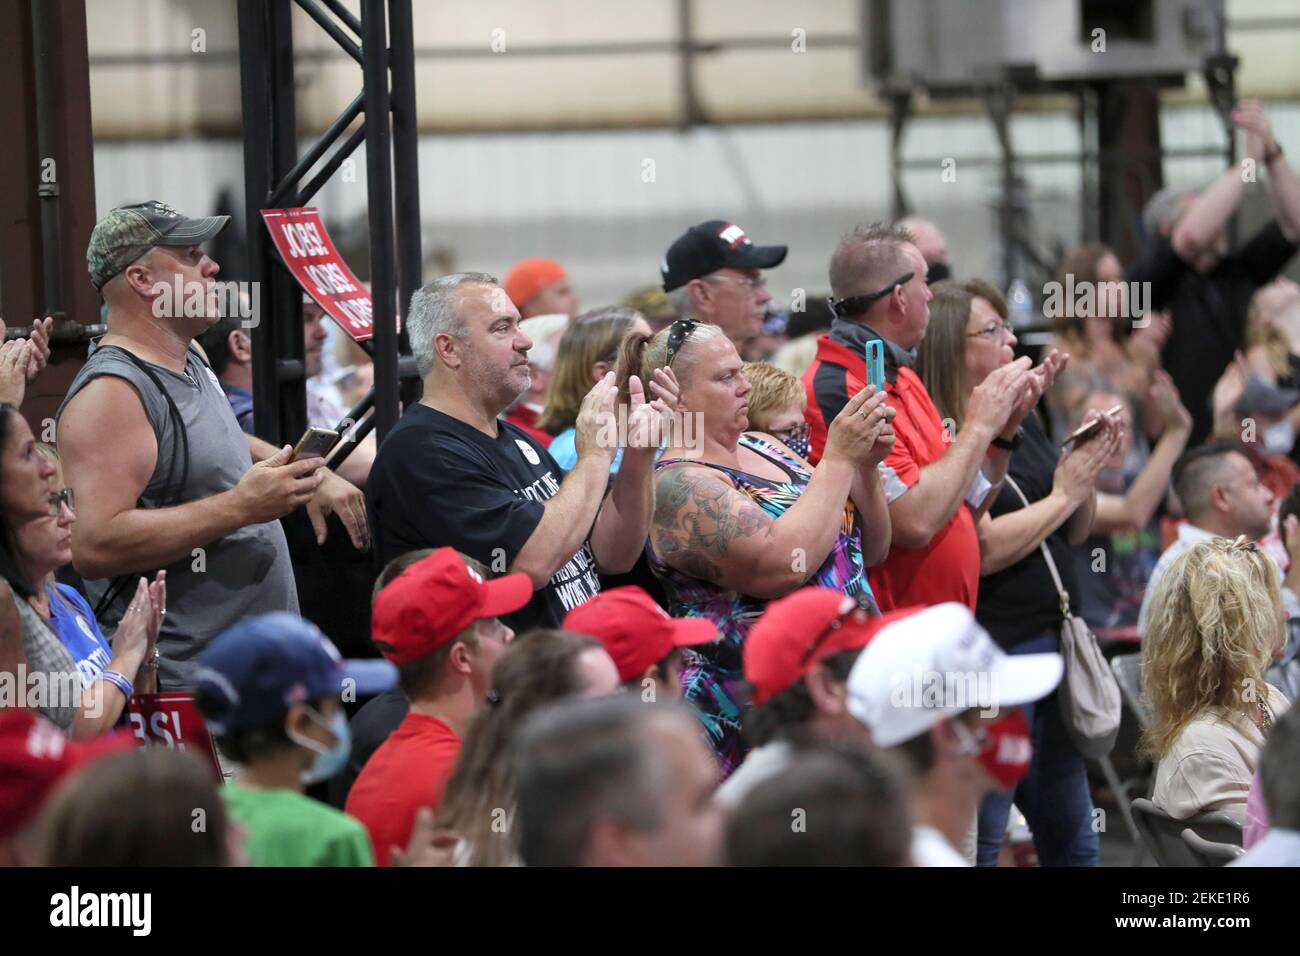 The crowd acknowledges Vice President Mike Pence during his visit to Tankcraft Corp. Mjs Pence Nws Sears 25 (Photo by Michael Sears / Milwaukee Journal Sentinel/USA Today Network/Sipa USA) Stock Photo